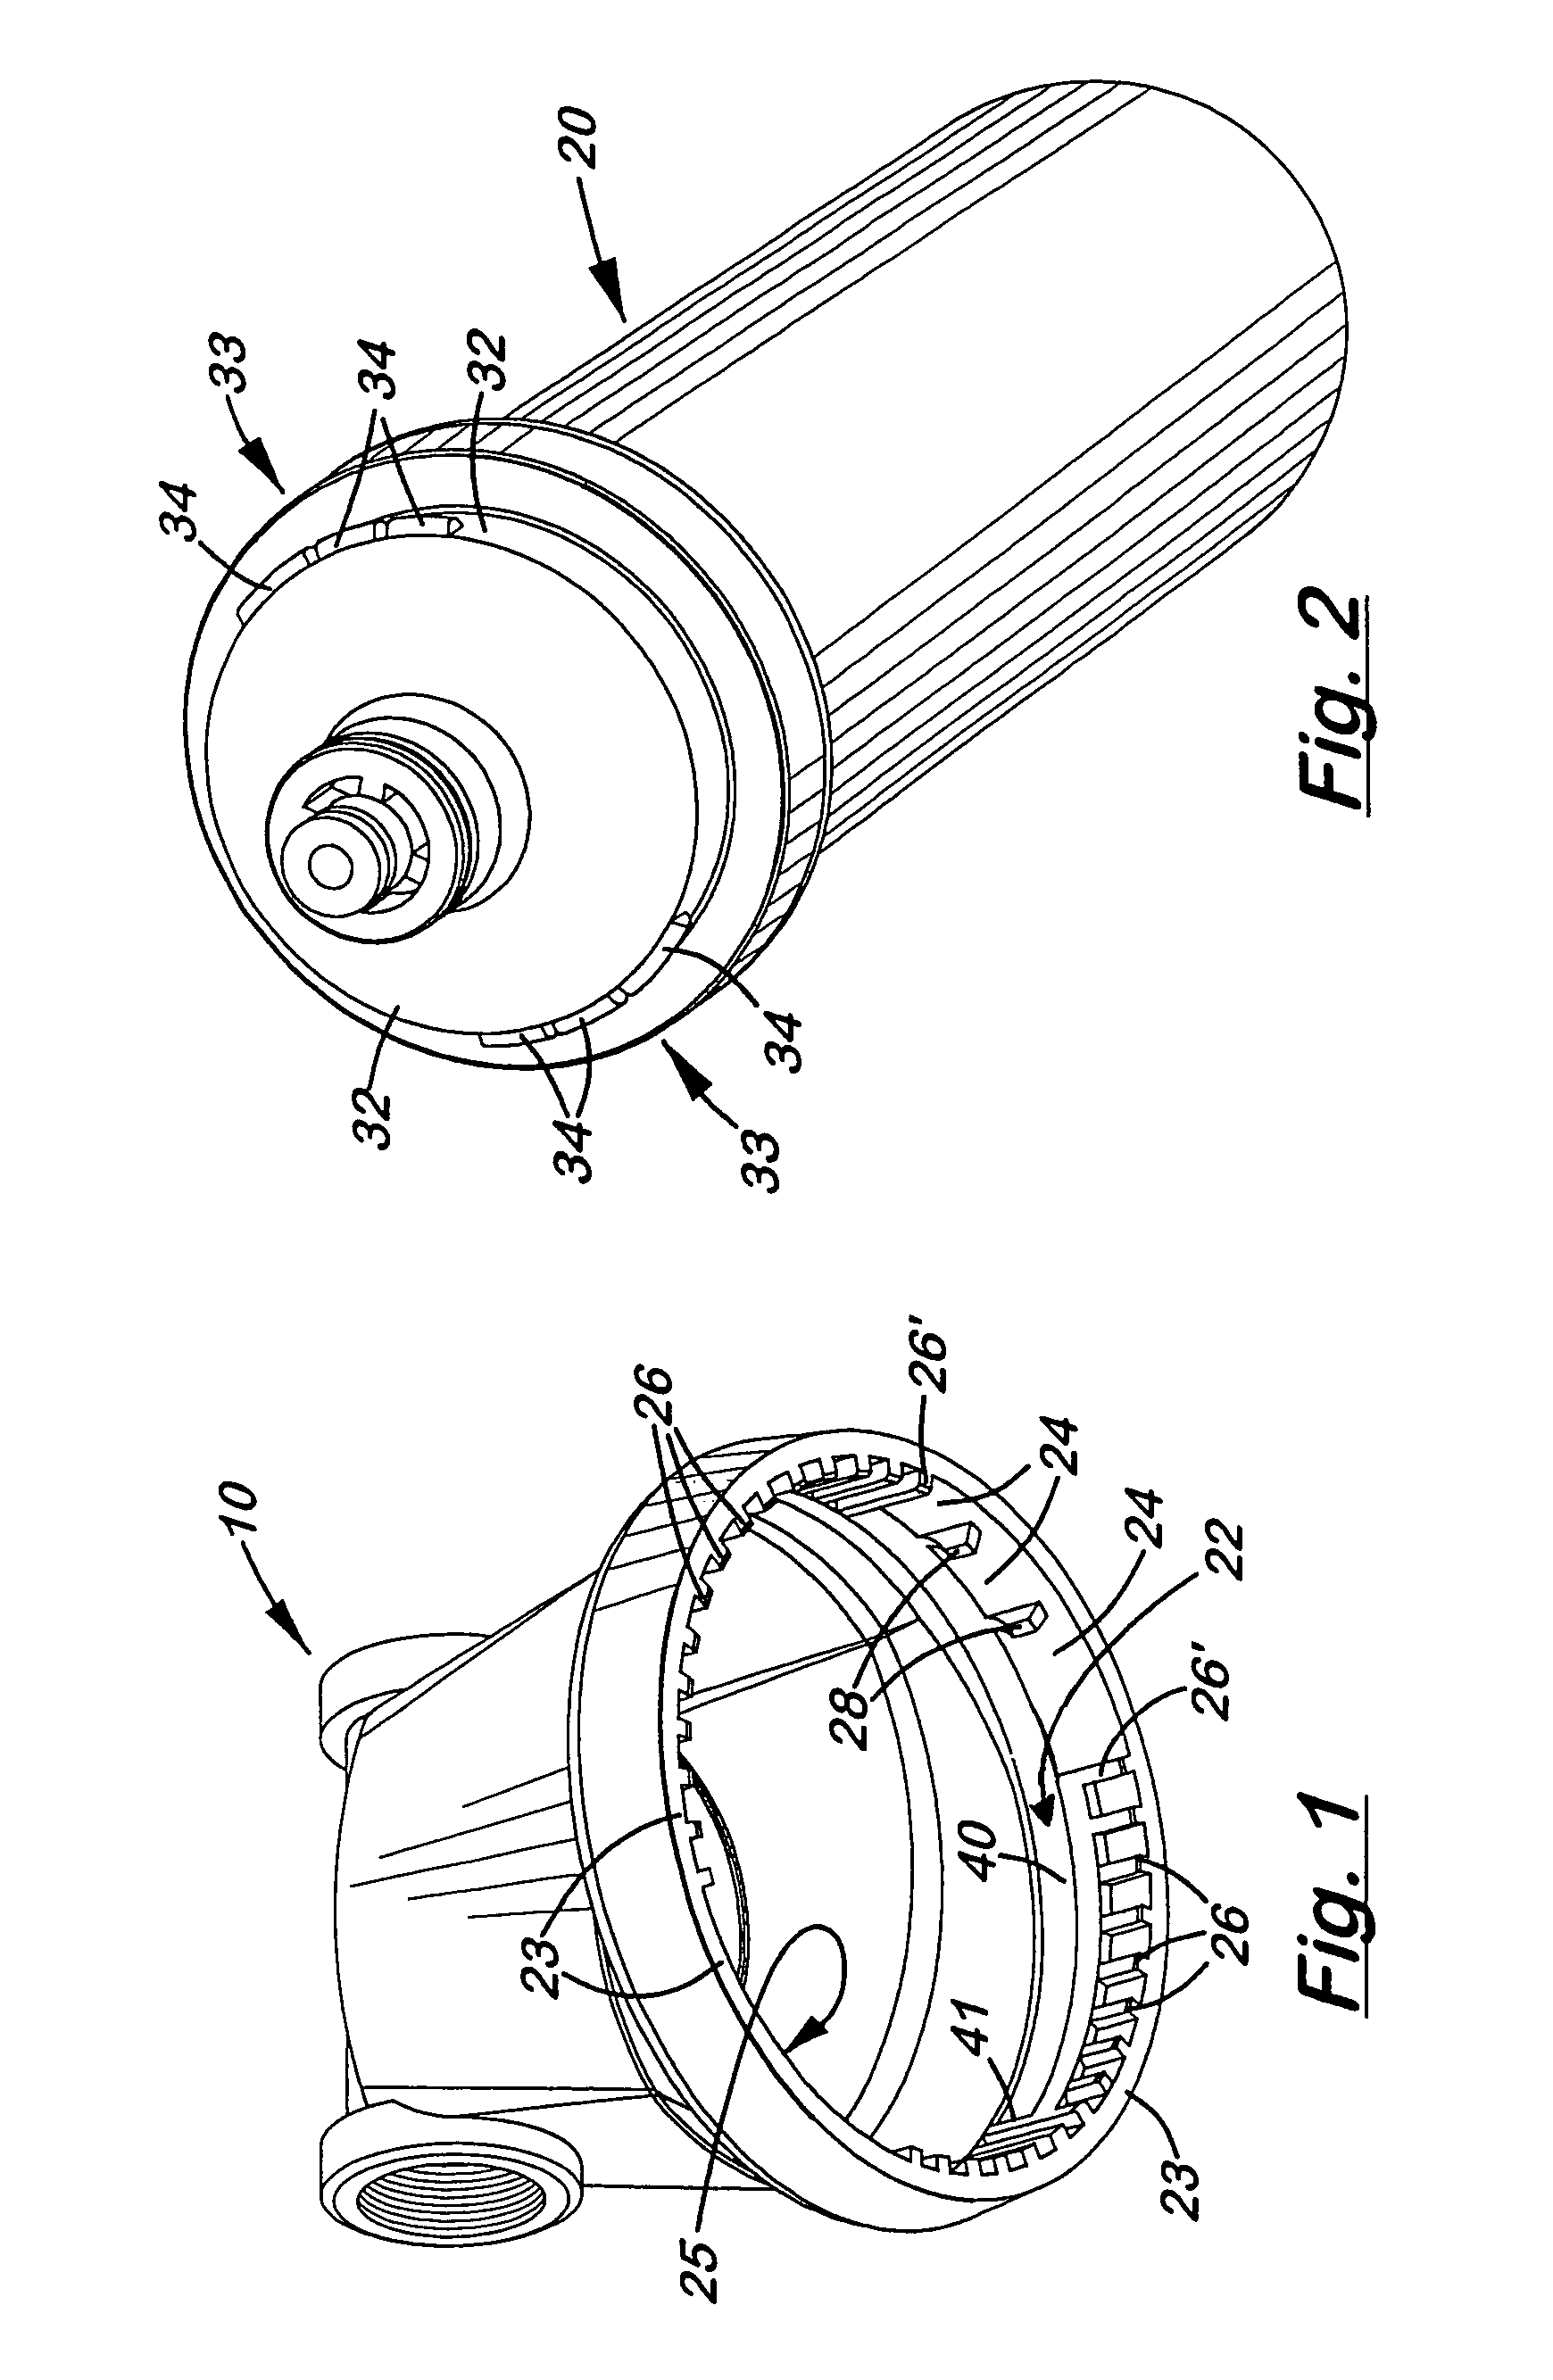 Keyed system for connection of filter cartridge to filter holder